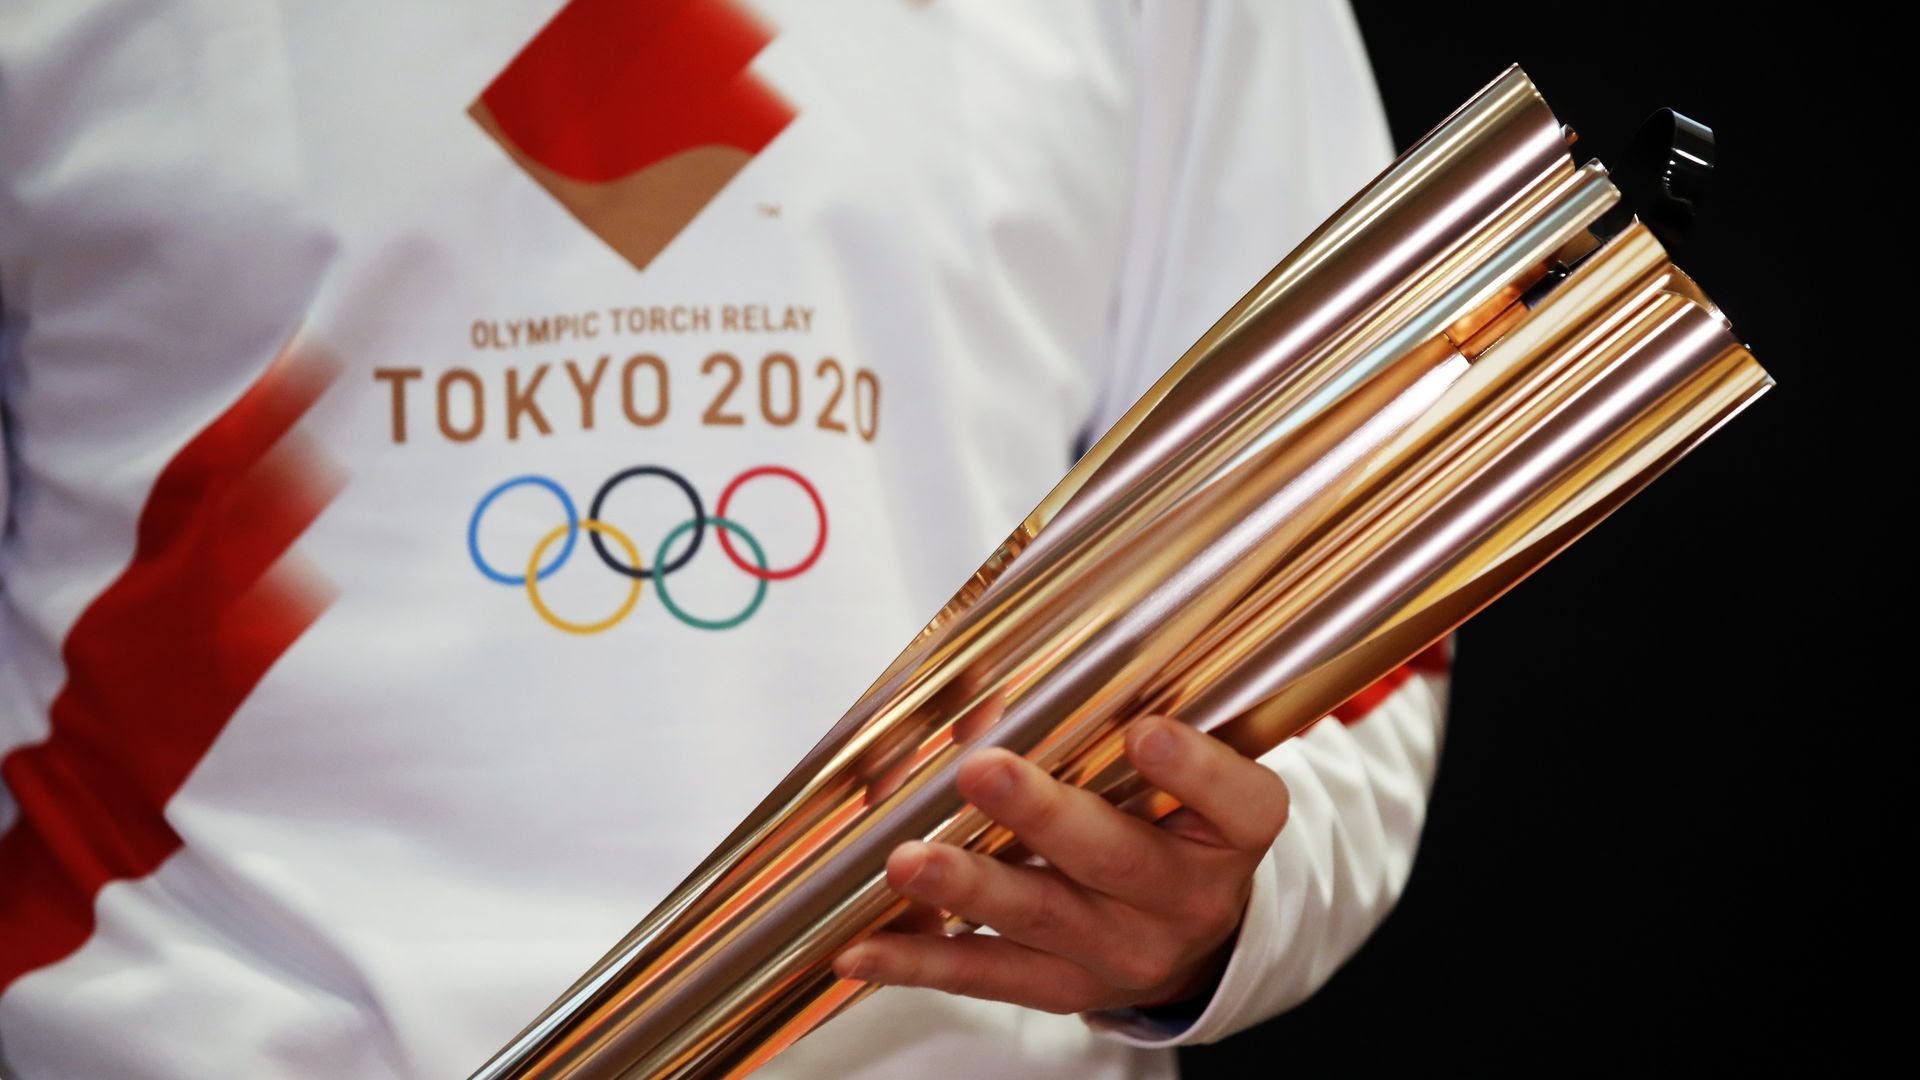 Greek singer Sakis Rouvas holds the torch of the Tokyo Olympic Games during a 2020 presentation of the torch relay in Athens. Photo: Thanassis Stavrakis/AP